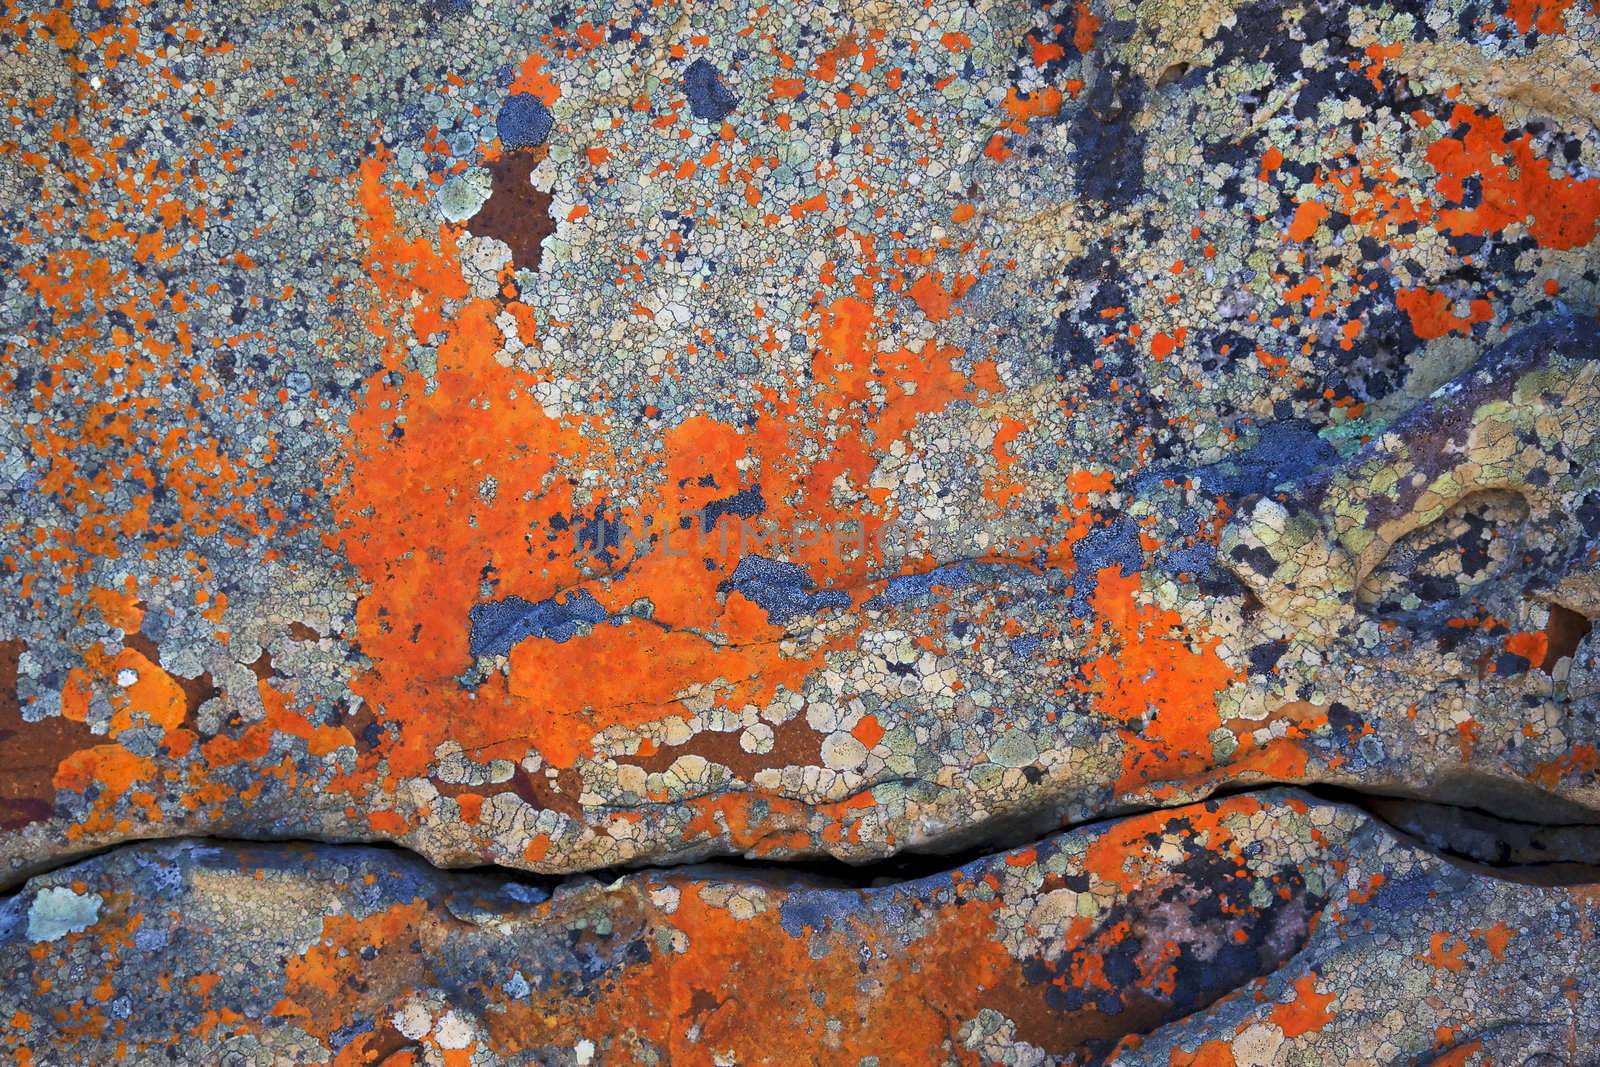 Abstract lichen patterns on a rock, Cape of Good Hope, Table Mountain National Park, South Africa.